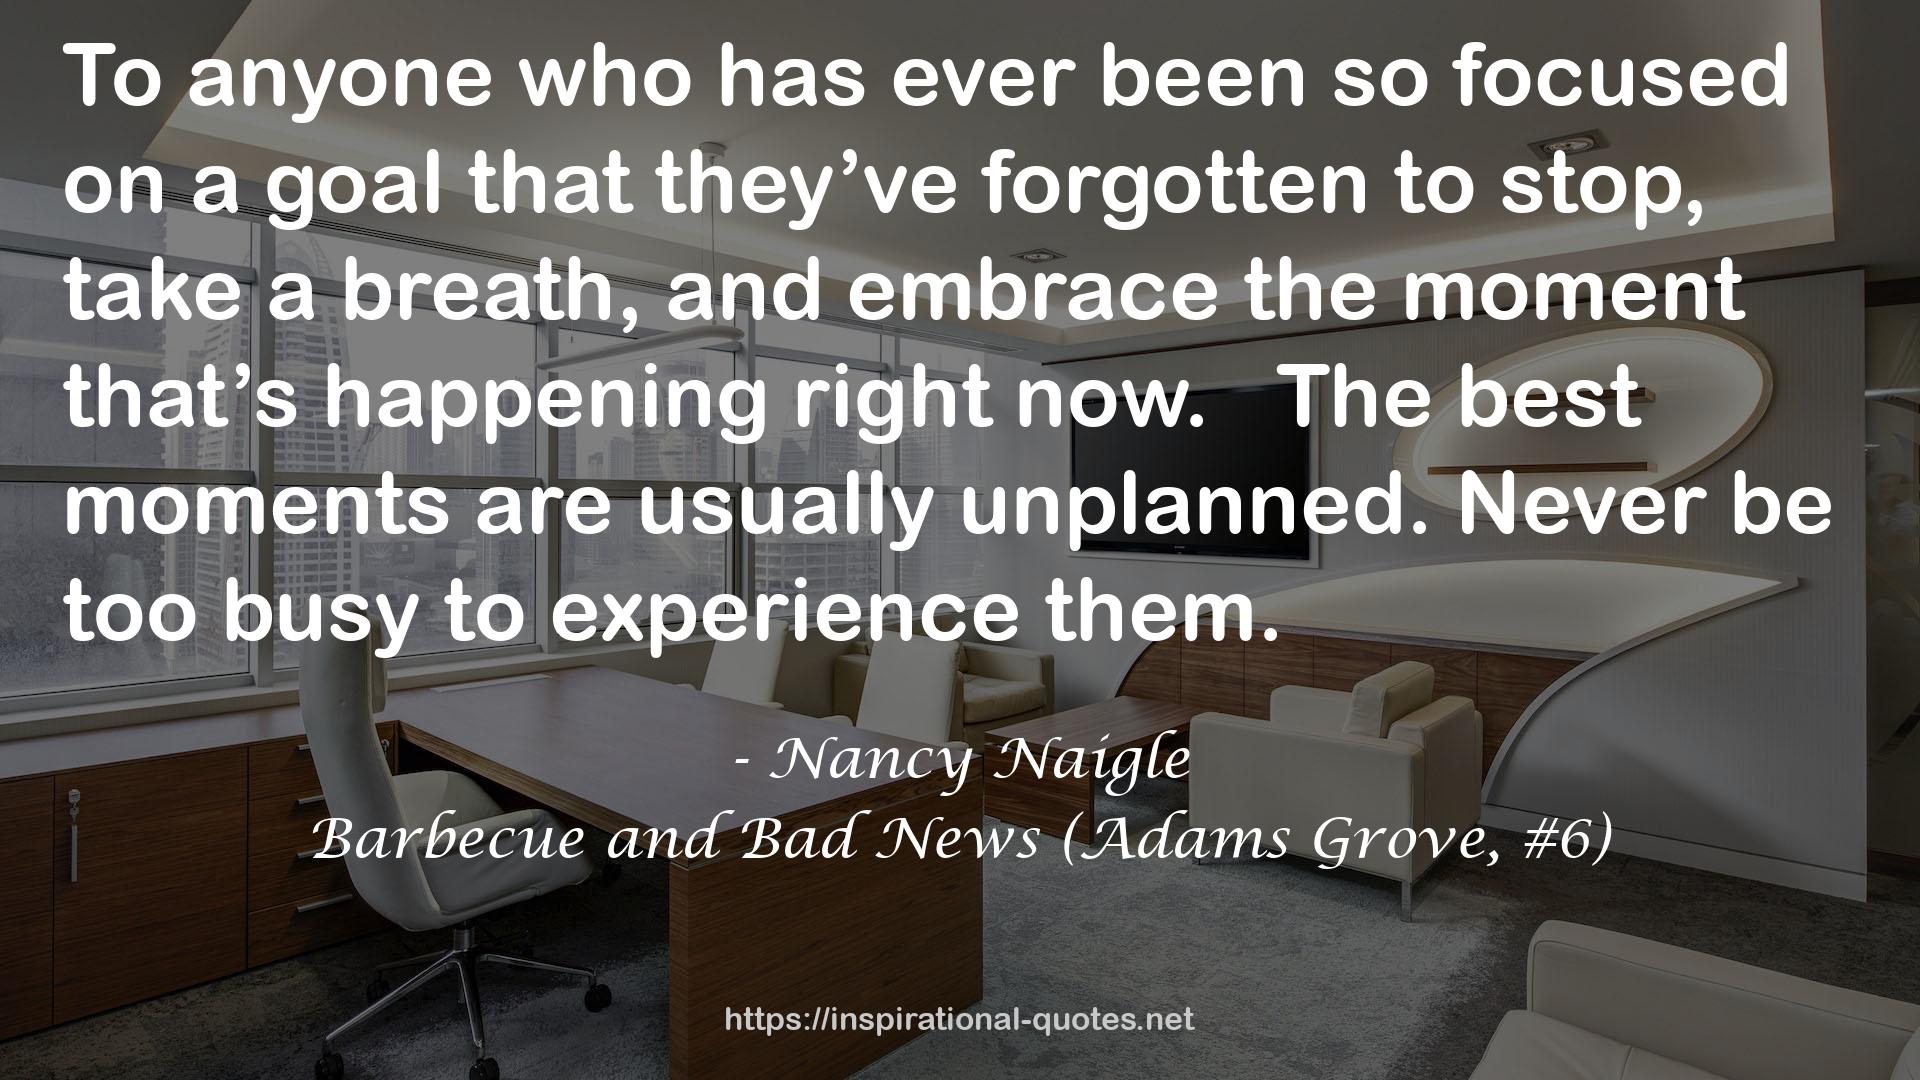 Barbecue and Bad News (Adams Grove, #6) QUOTES